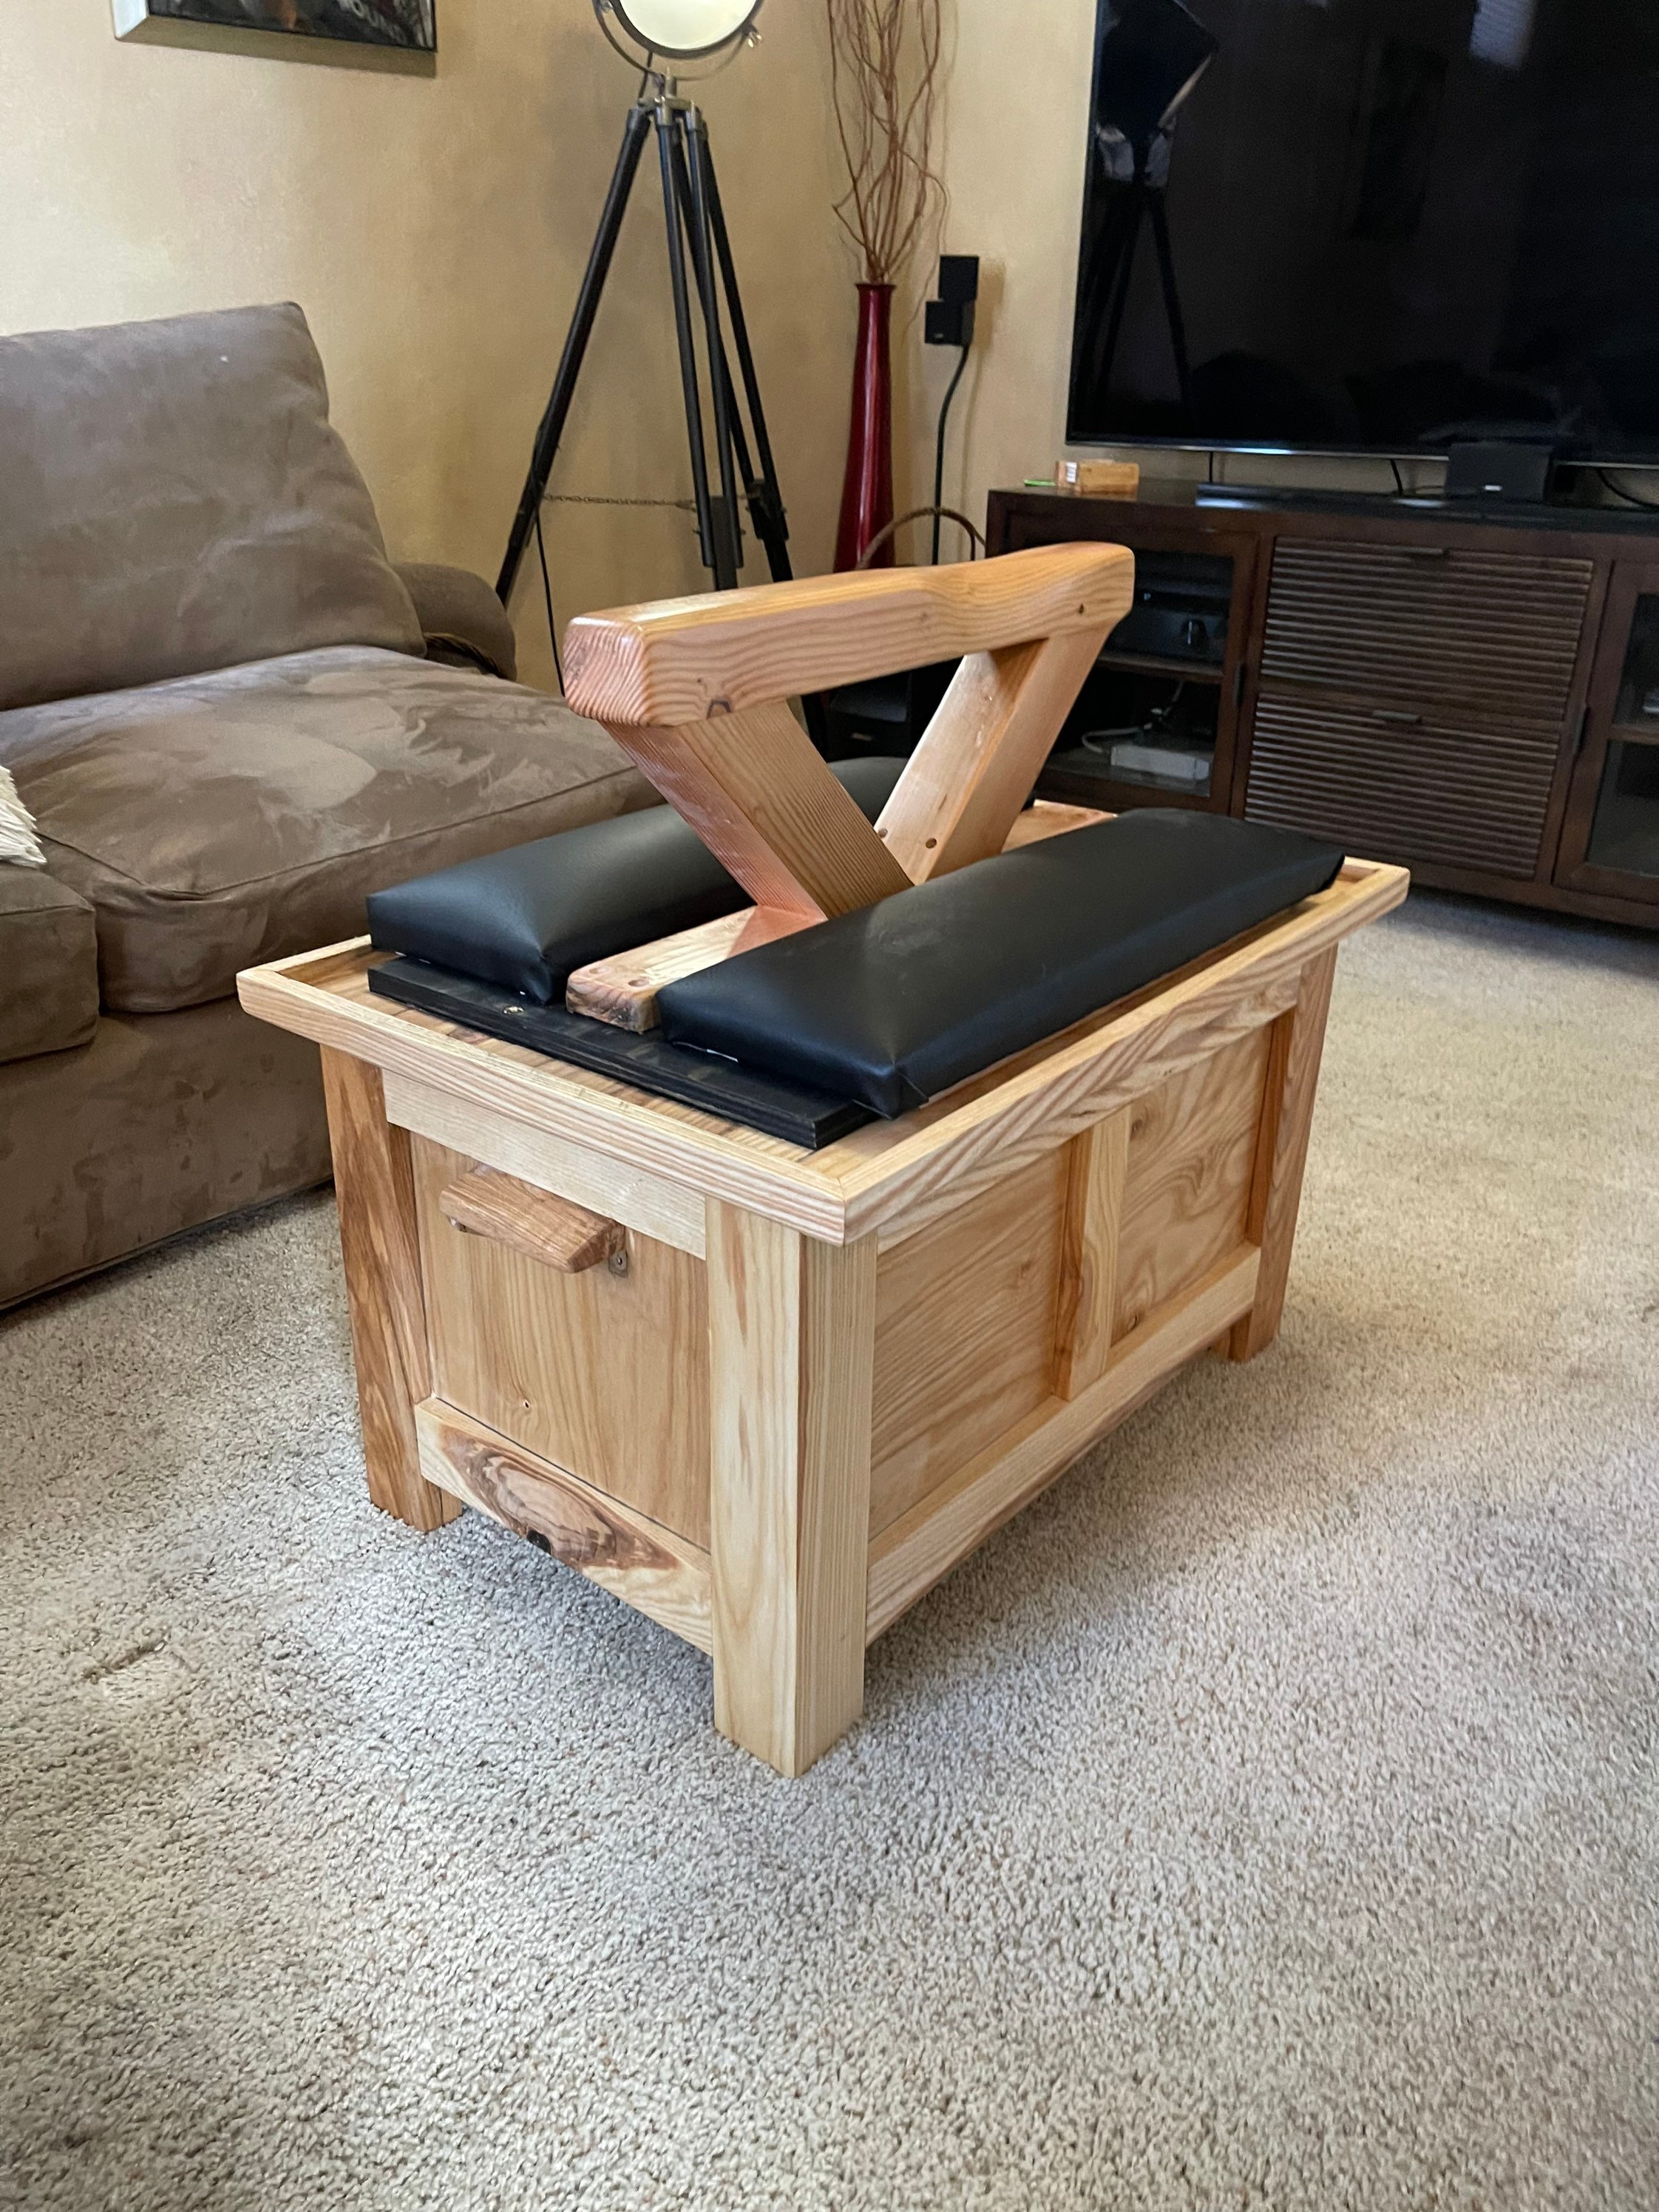 Trunk / Coffee Table / Sex Bench / Spanking Bench or Bondage